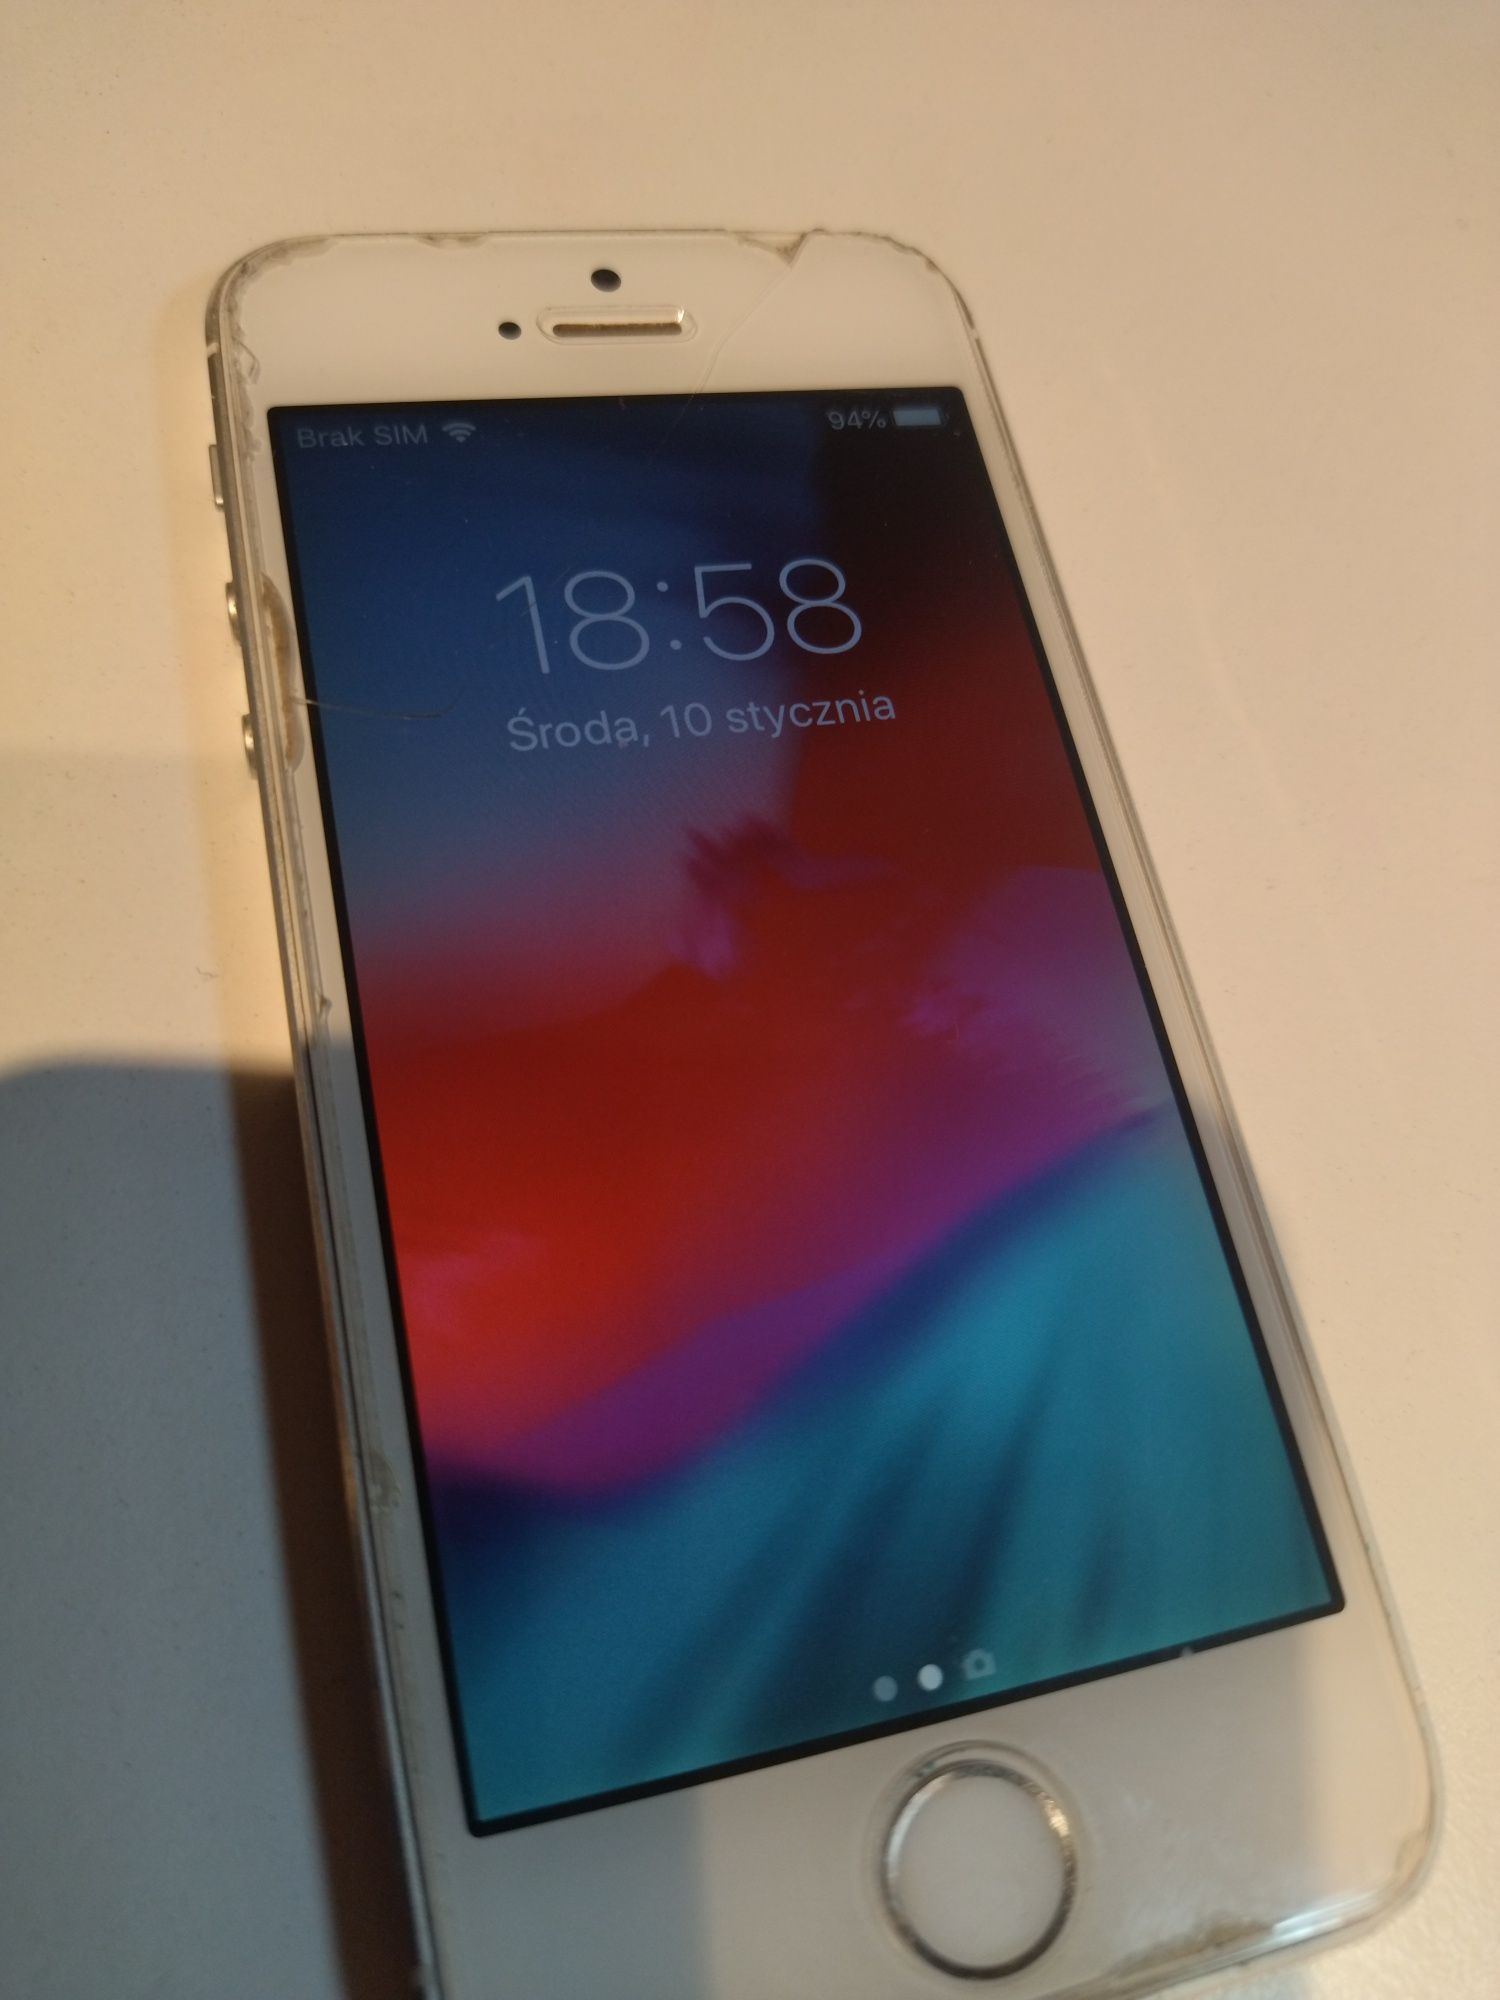 iPhone 5S model A1457